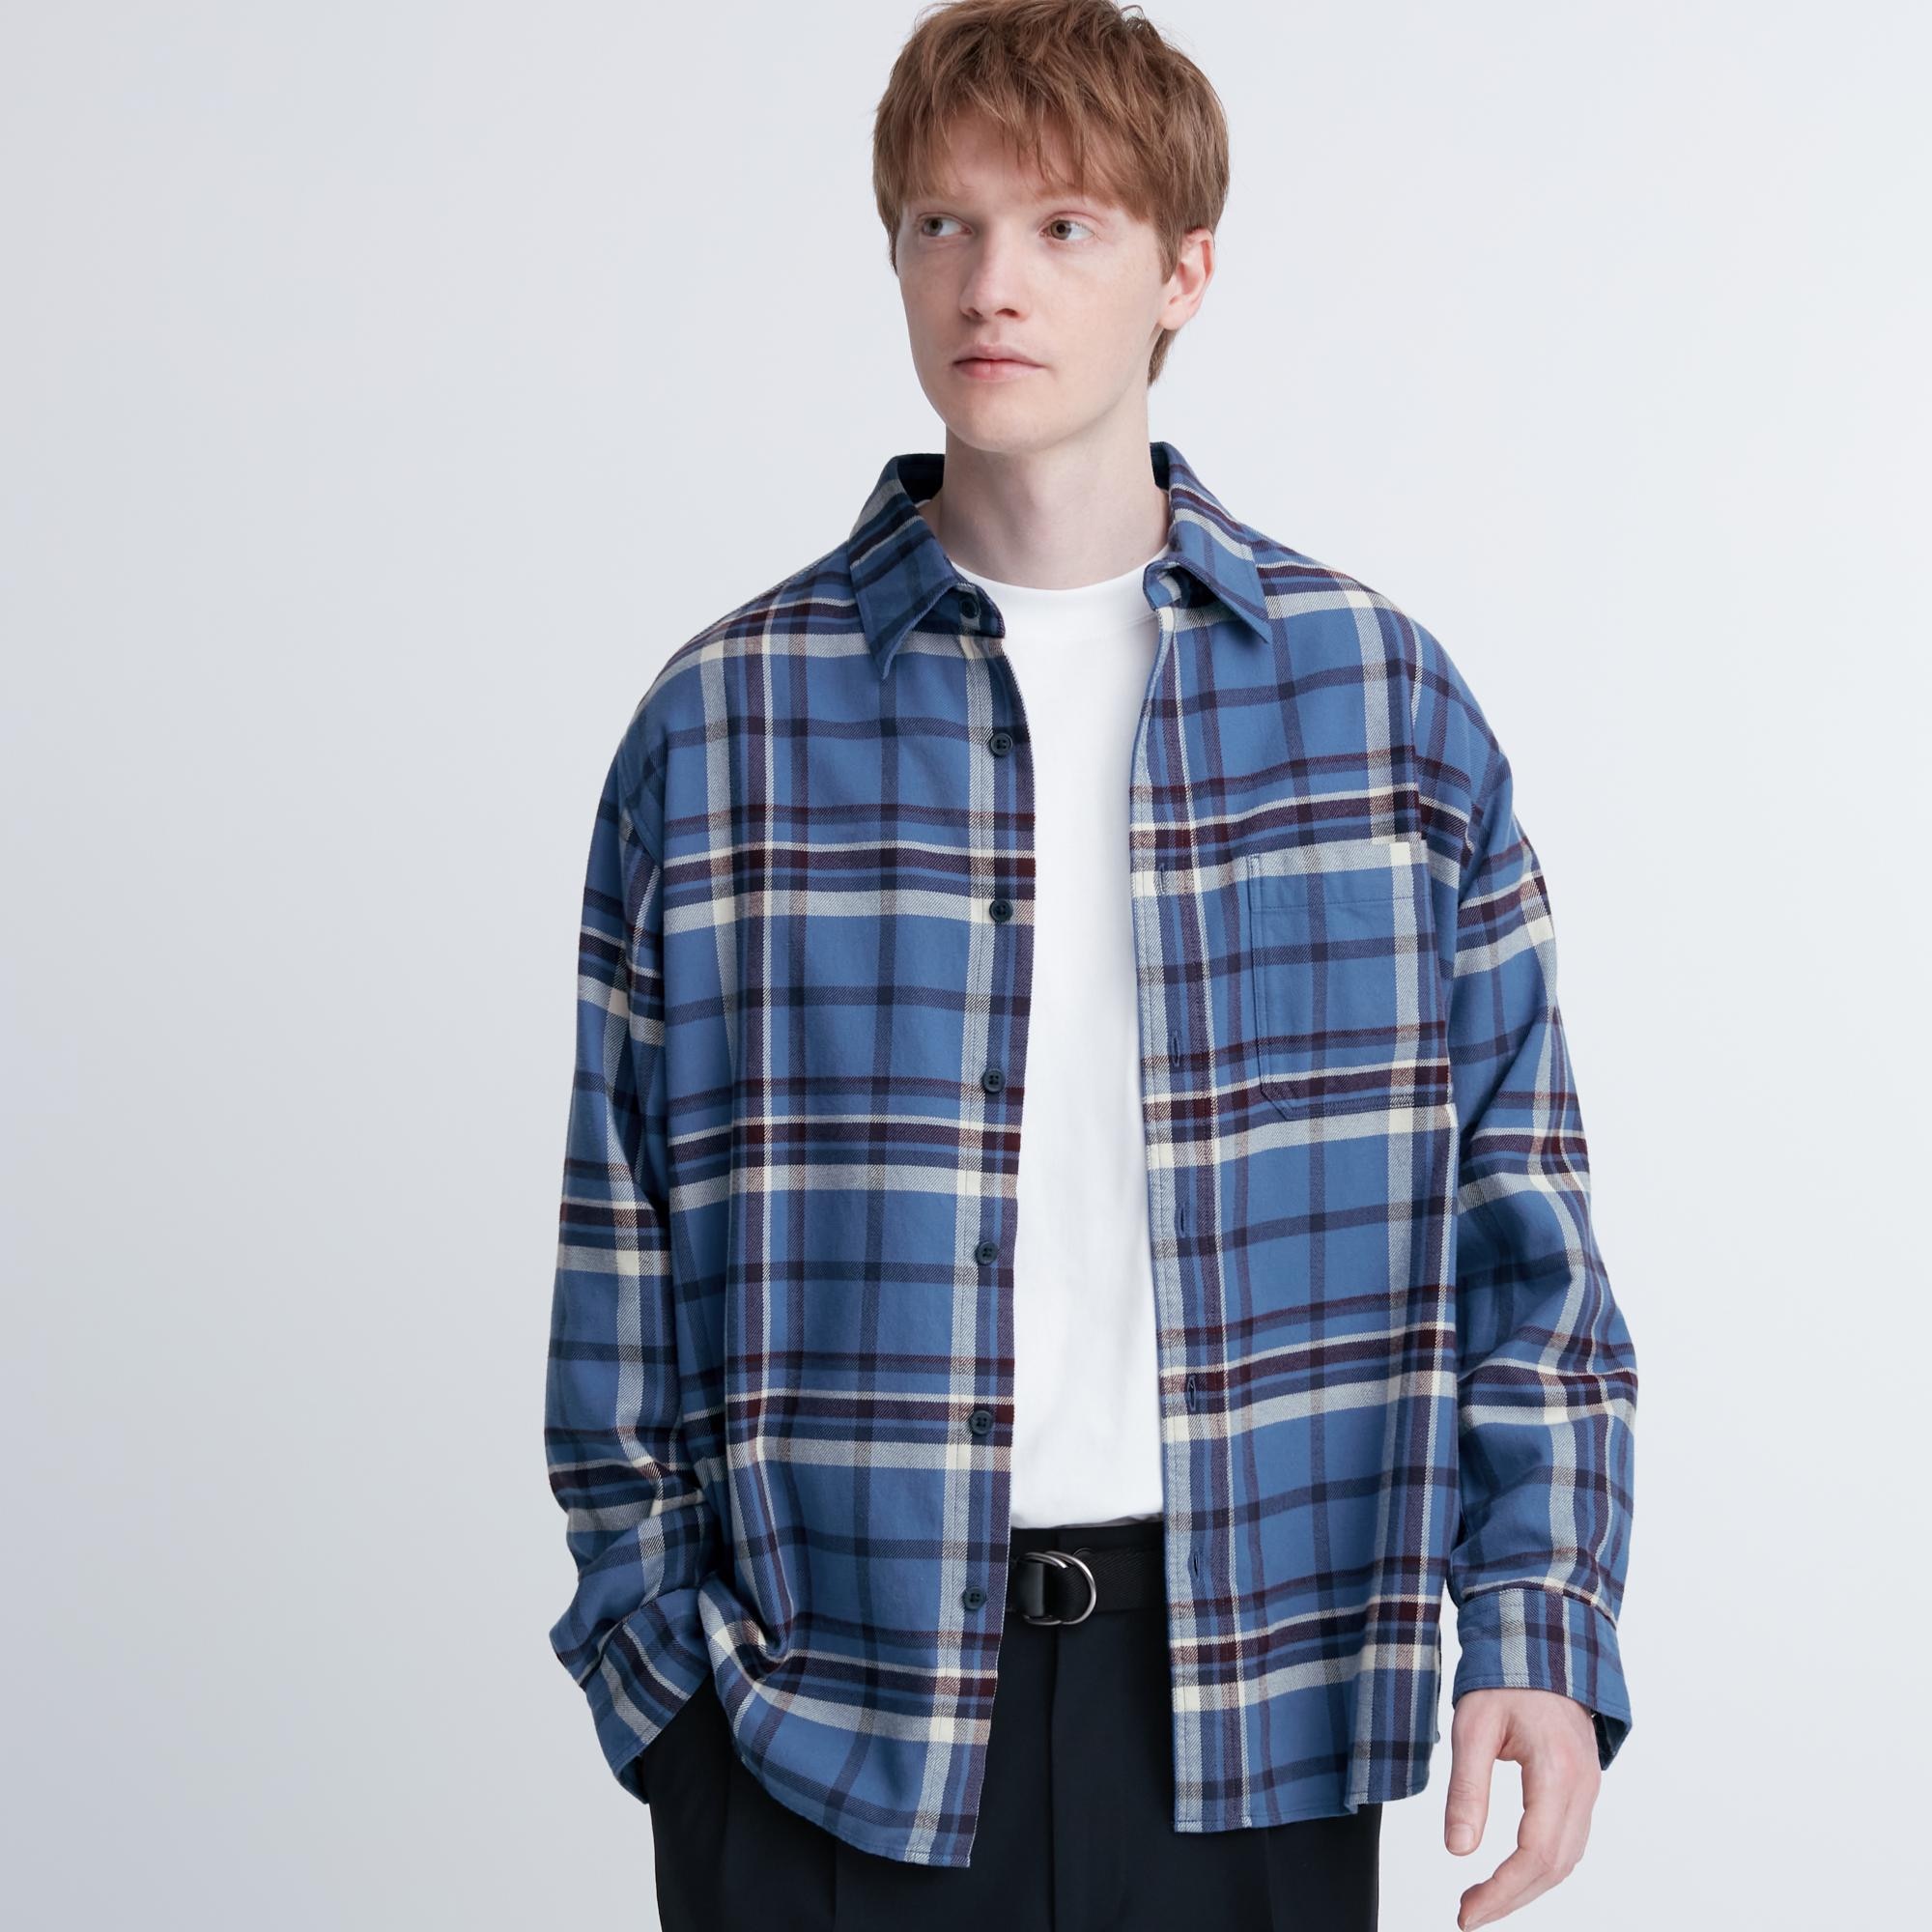 Uniqlo Plaid Shirt Blue and Yellow Flannel  Yellow flannel Plaid shirt  Clothes design